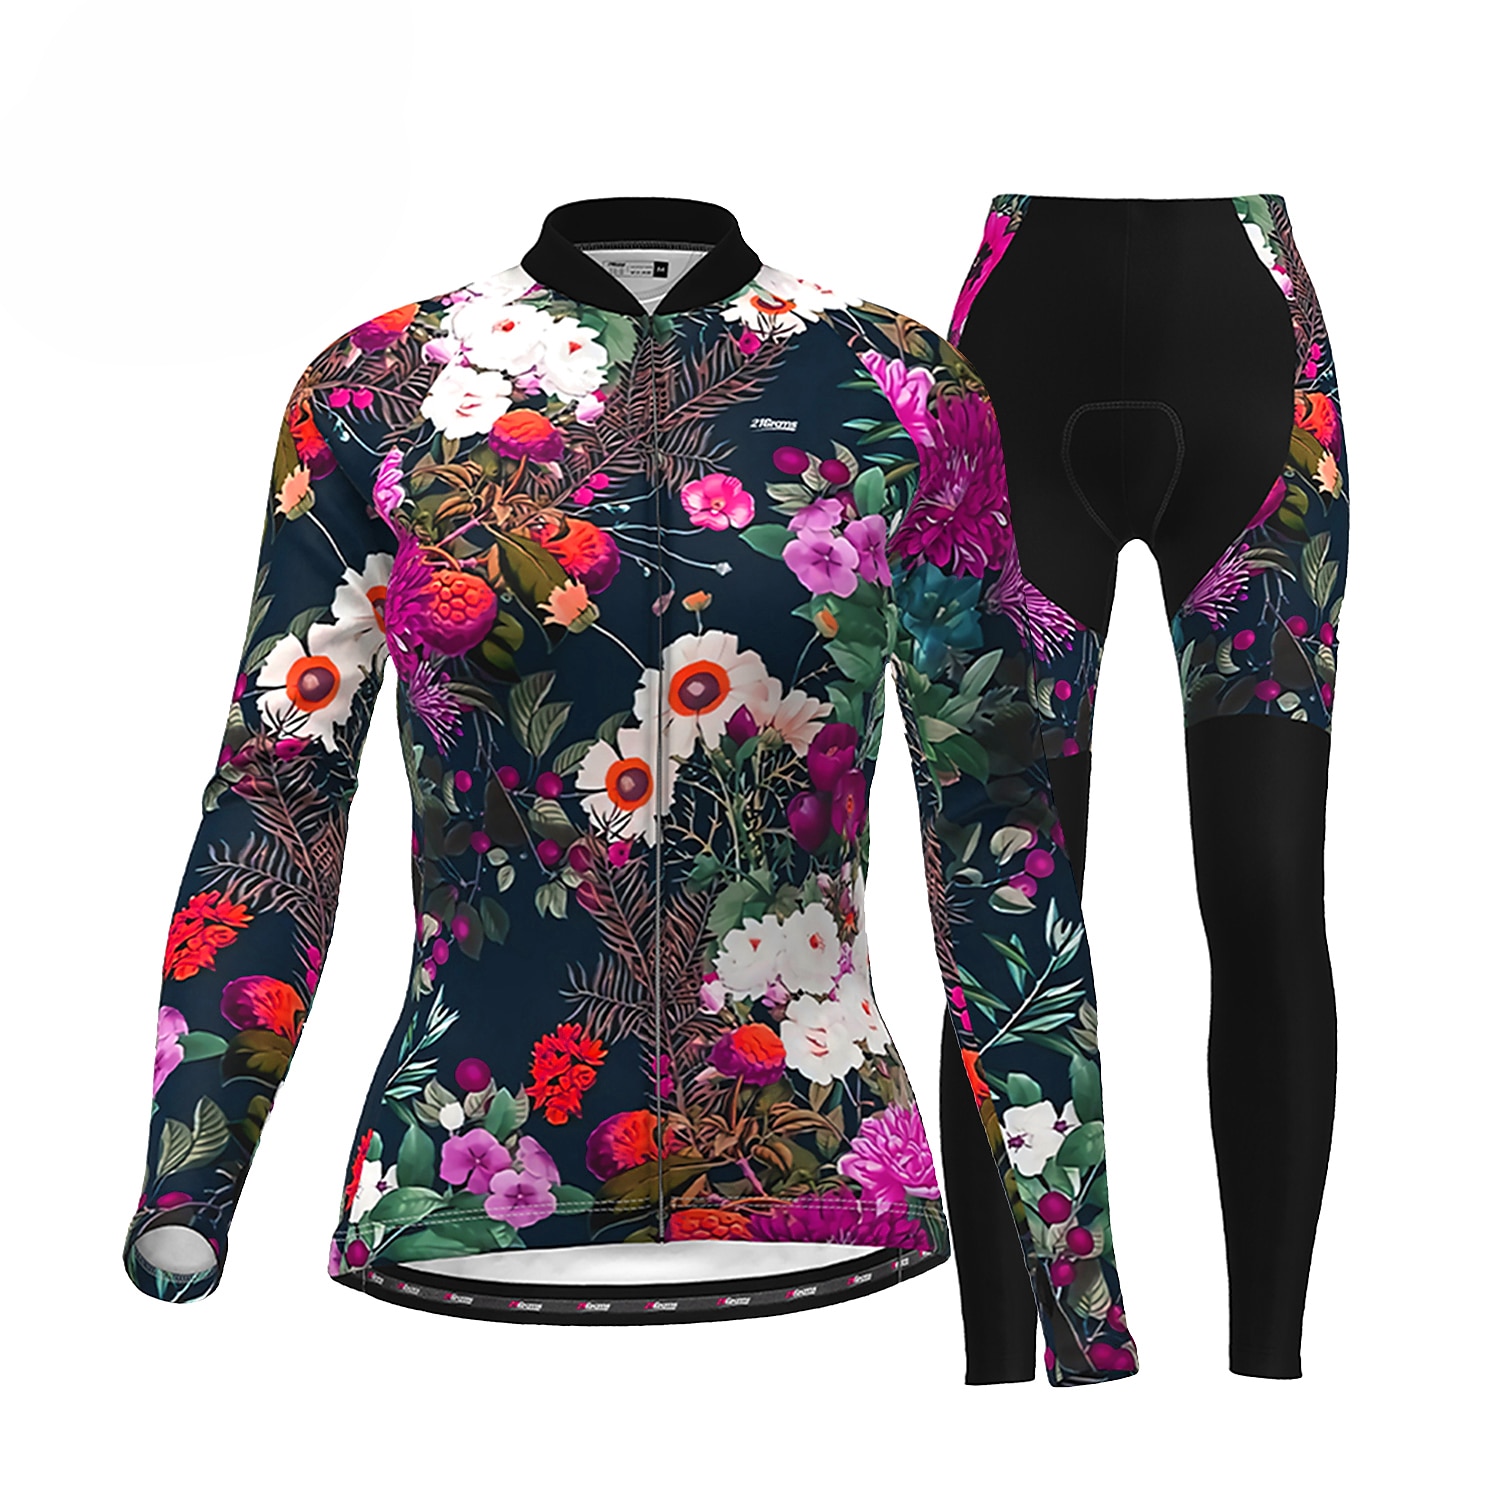 21Grams Long Sleeve Cycling Jersey with Tights Spandex Silicon Polyester Black/Red Purple Yellow Patchwork Bike Clothing Suit Thermal/Warm Breathable 35D Pad Quick Dry Limits Bacteria Sports